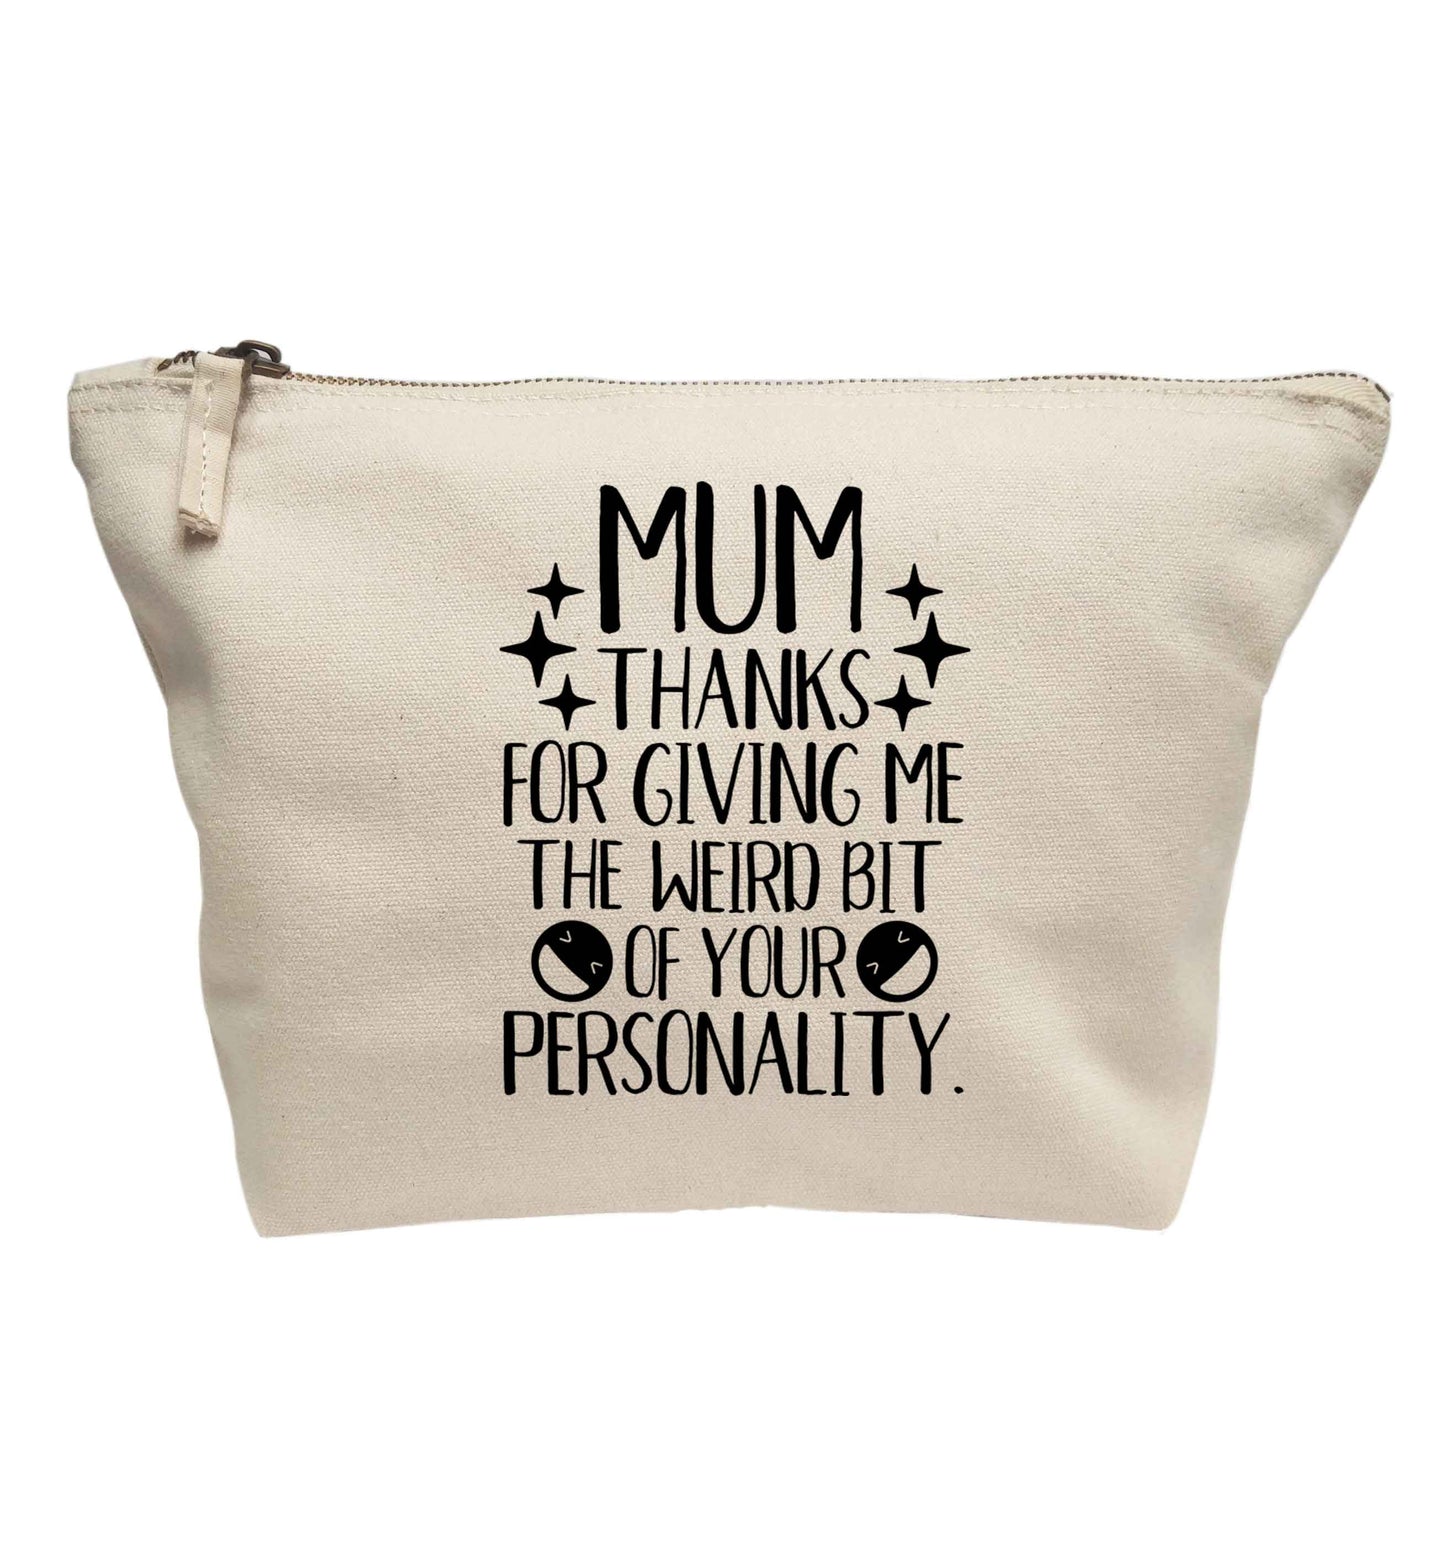 Mum thanks for giving me the weird bit of your personality | Makeup / wash bag